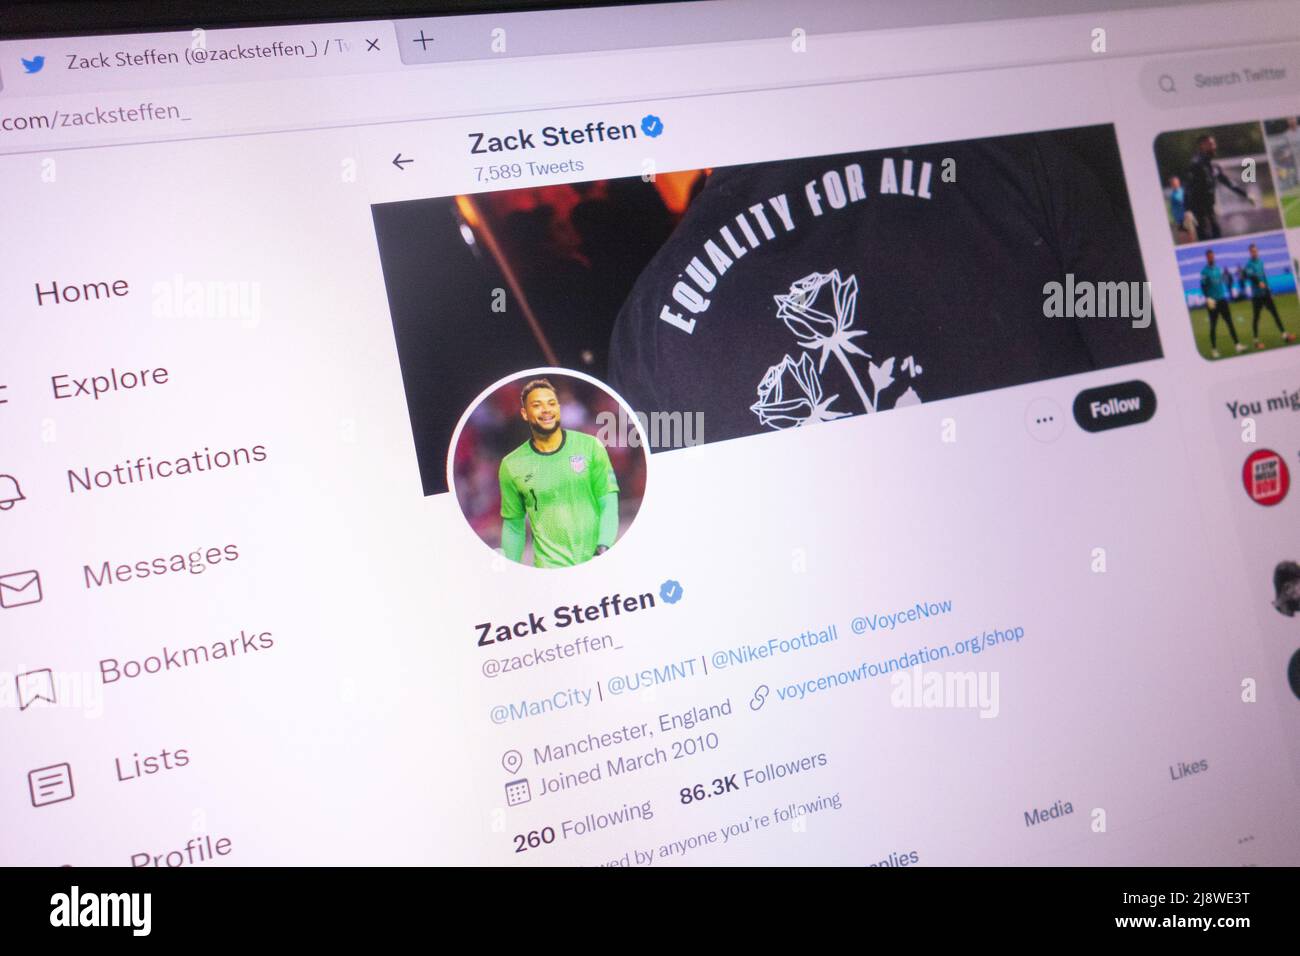 KONSKIE, POLAND - May 18, 2022: Zack Steffen official Twitter account displayed on laptop screen Stock Photo